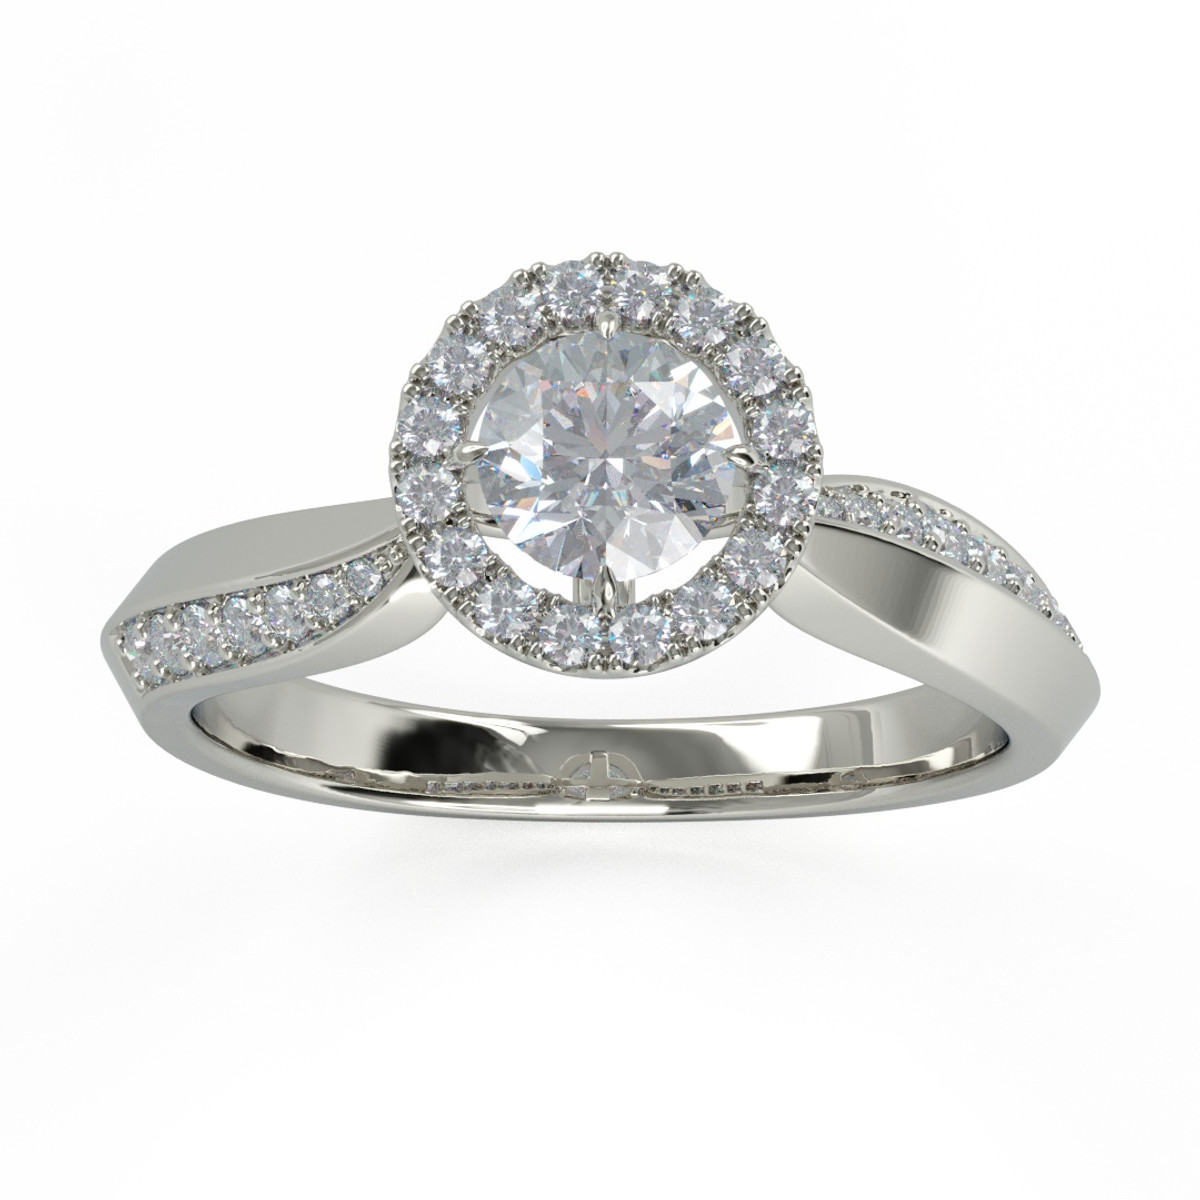 Engage 18KT White Gold & 0.32CT Diamond Solitaire Halo Engagement Ring Product Image